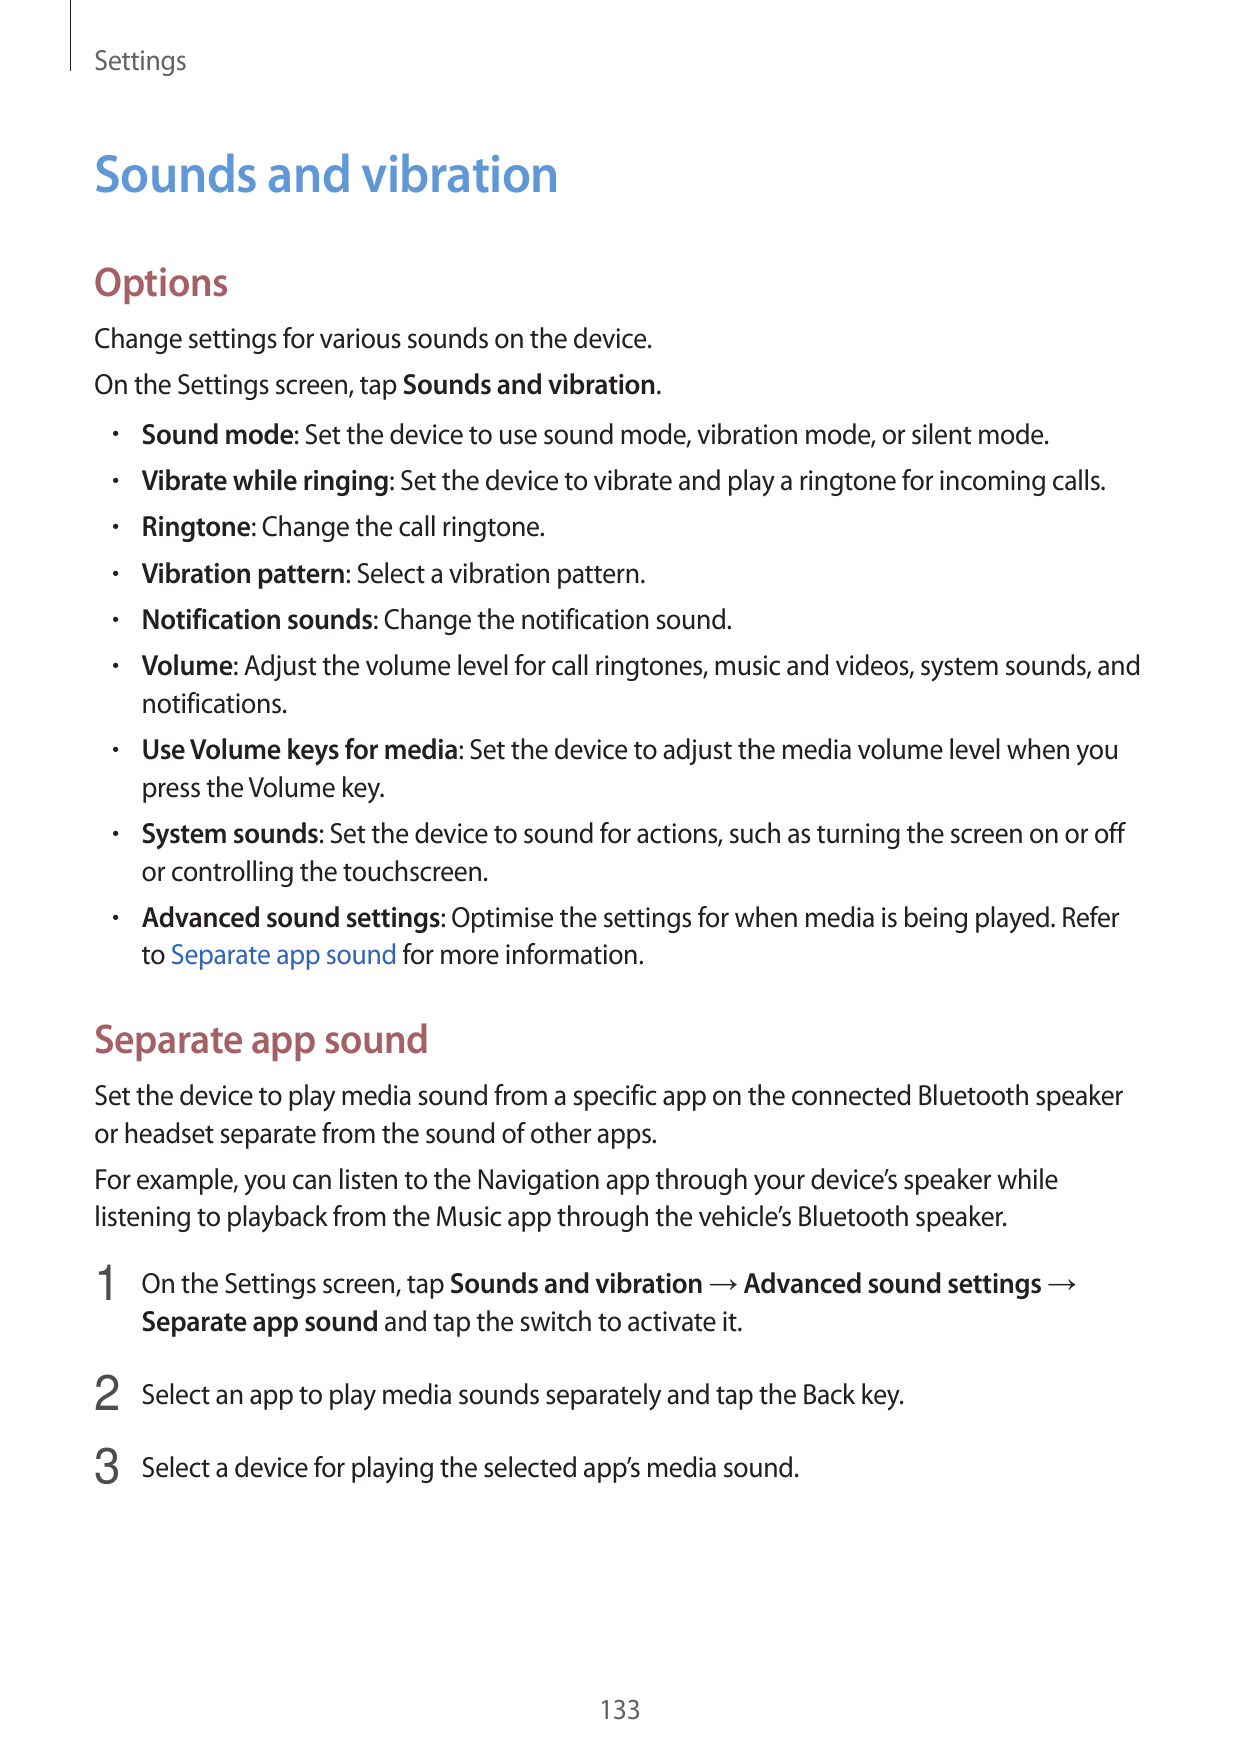 SettingsSounds and vibrationOptionsChange settings for various sounds on the device.On the Settings screen, tap Sounds and vibra